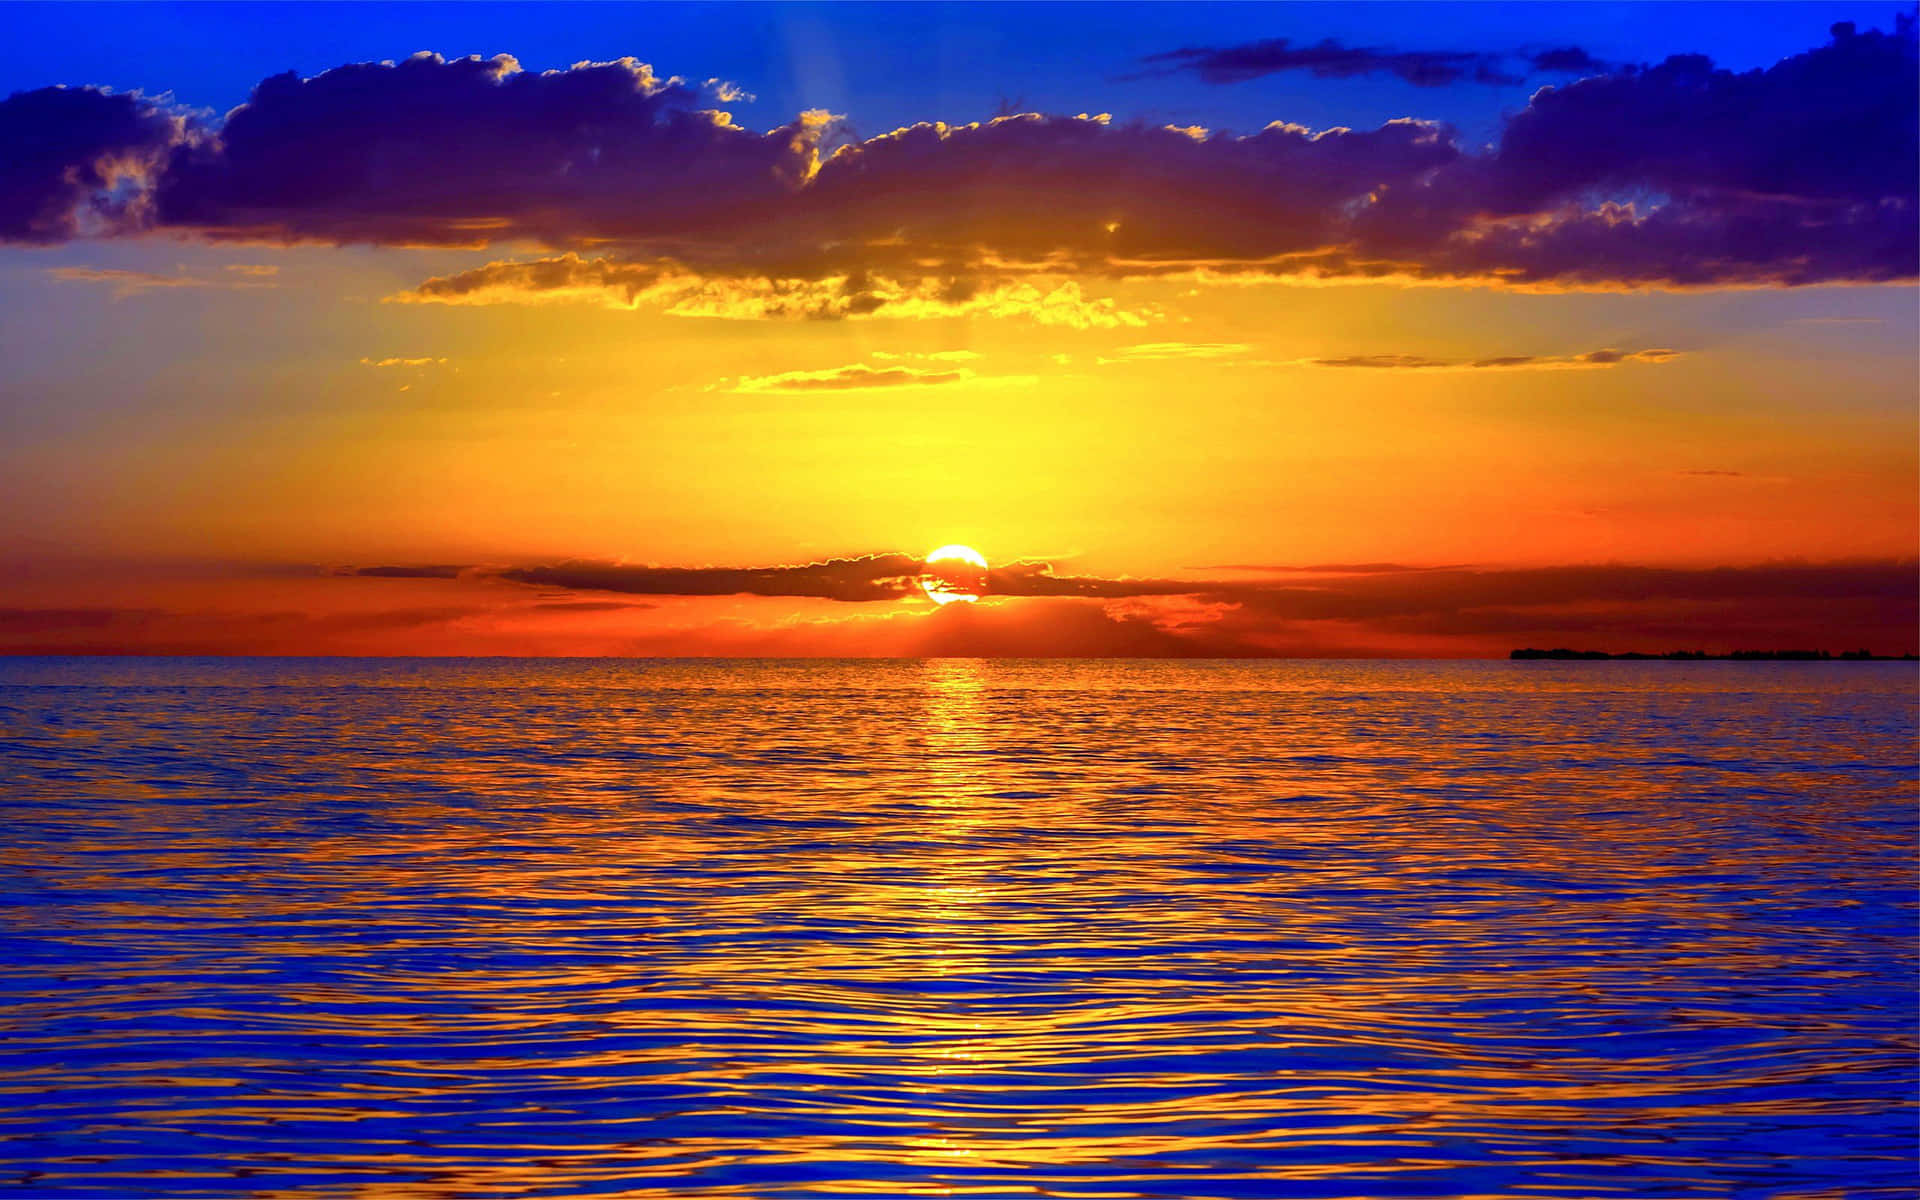 Breathtaking Sunset View at the Beach Wallpaper